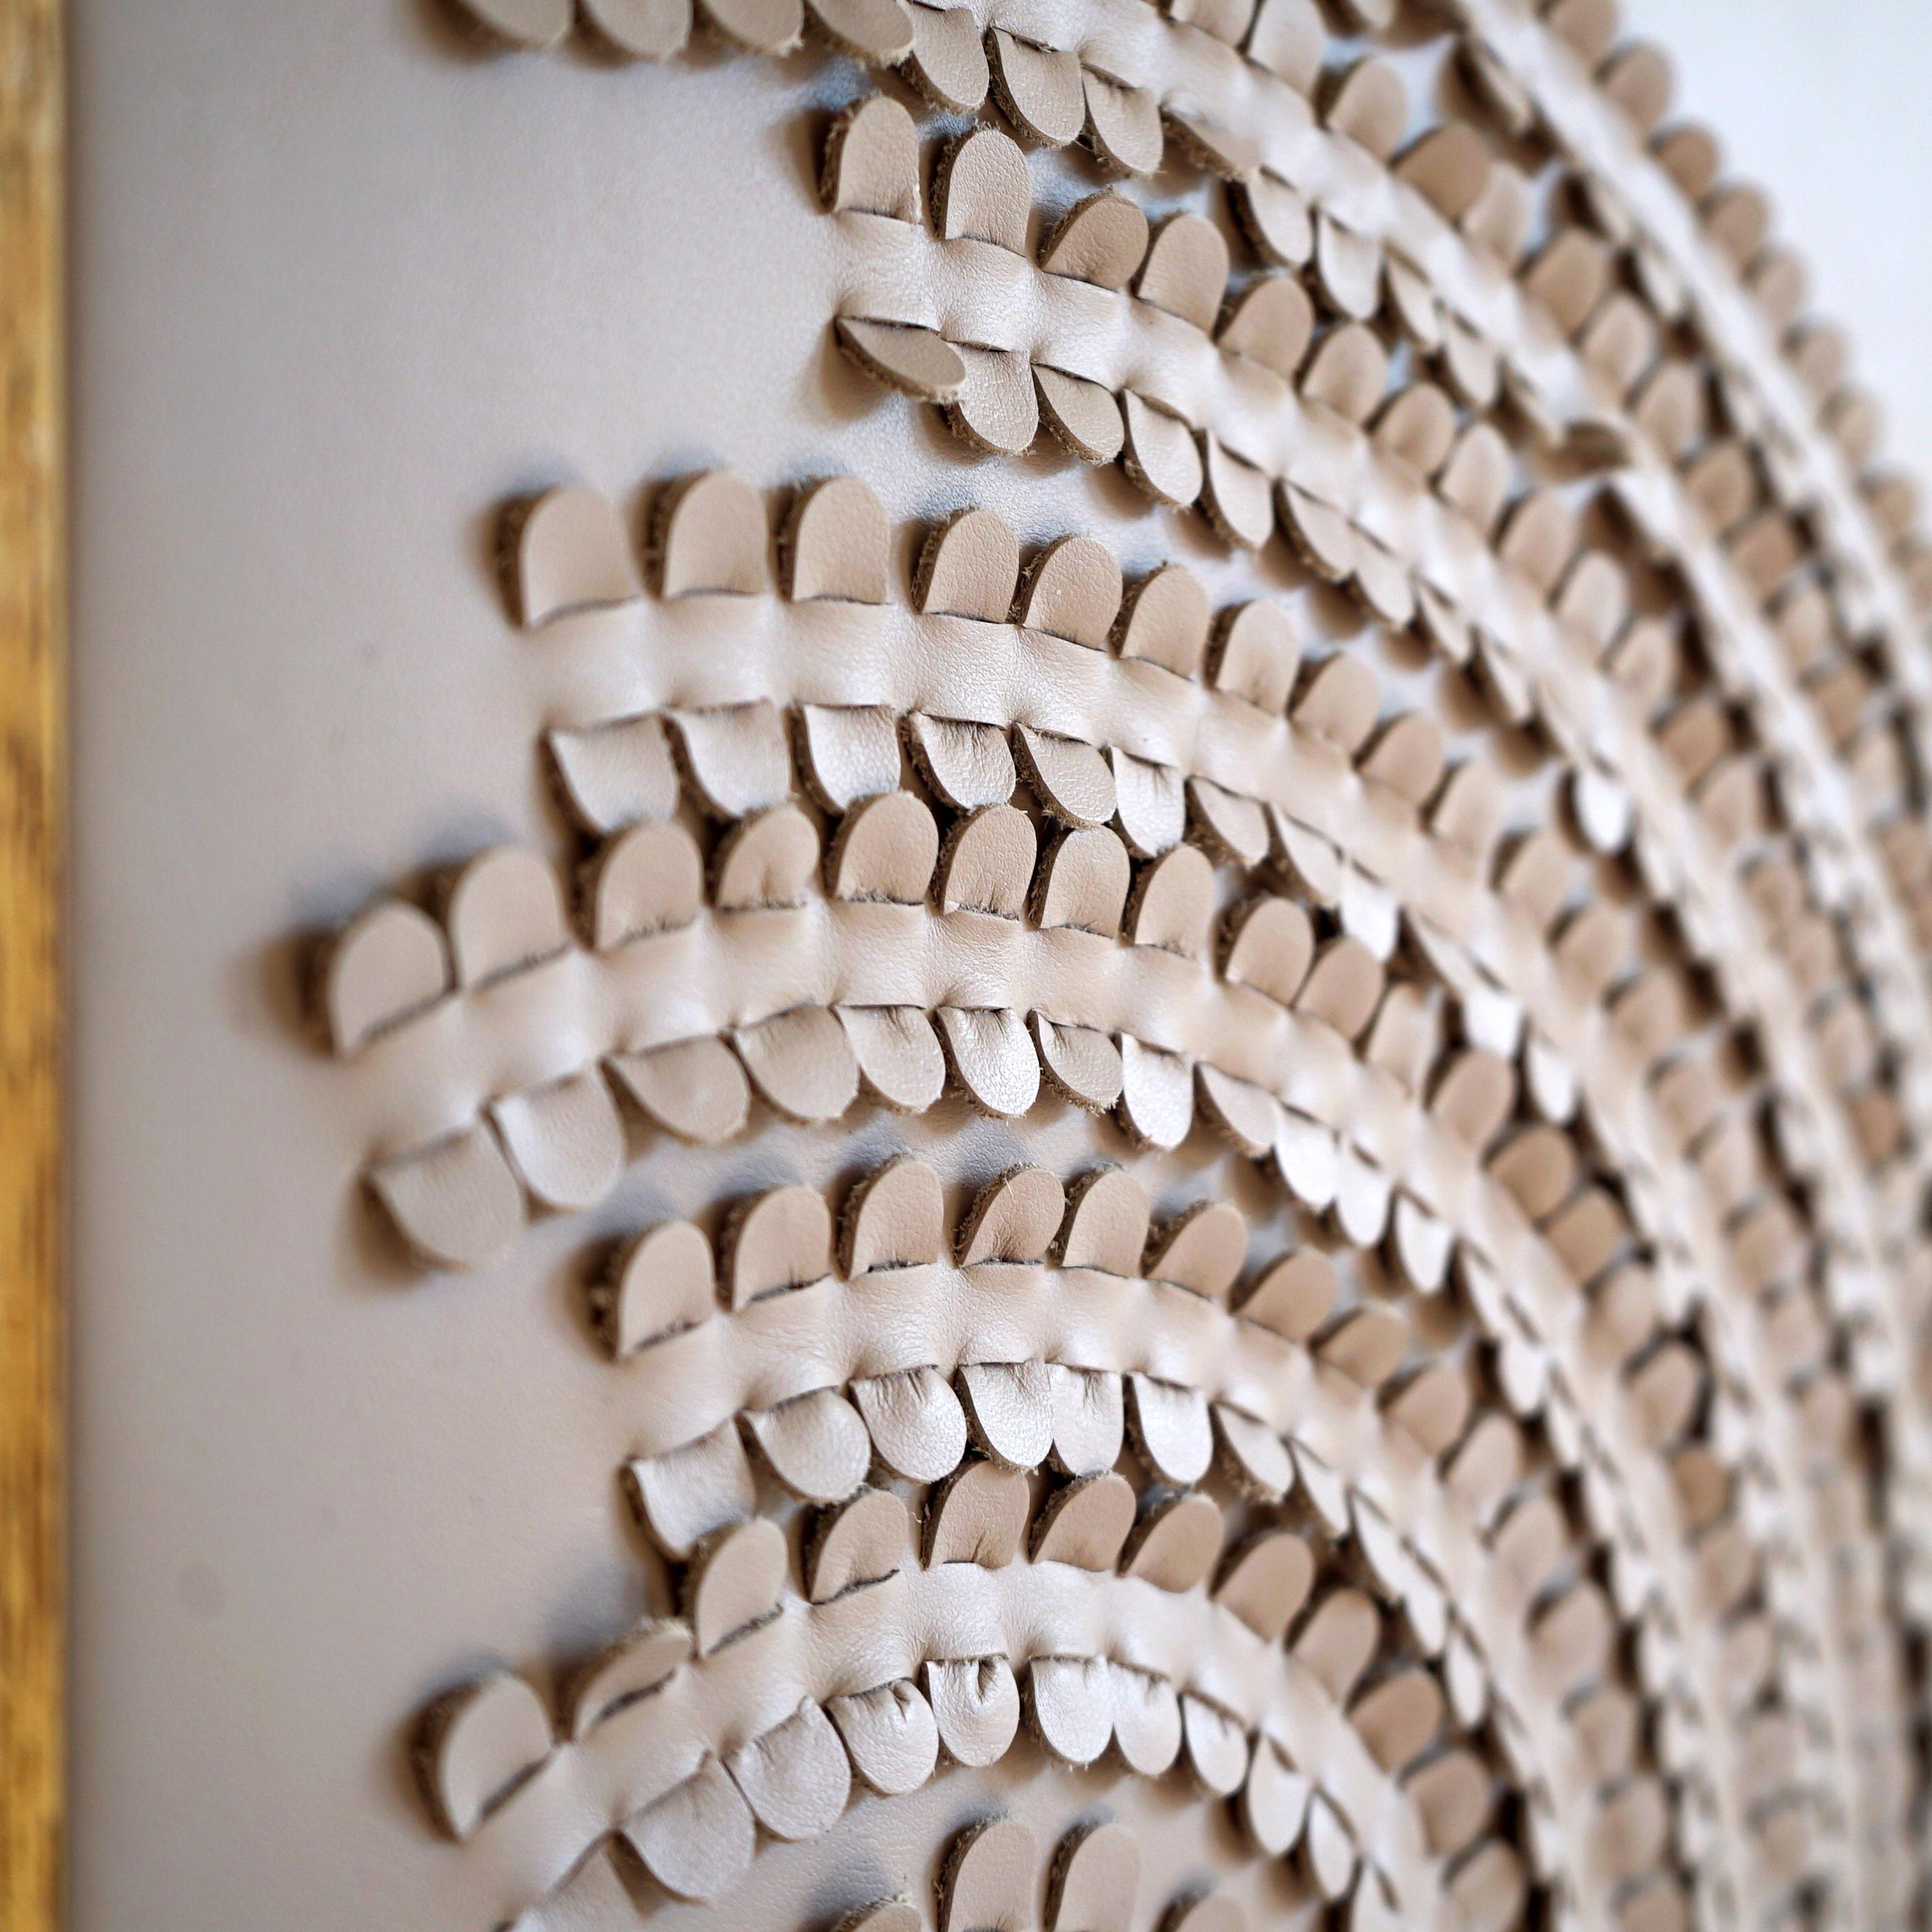 Hand-Crafted Weave, a Piece of 3d Sculptural Putty Coloured Leather Wall Art For Sale